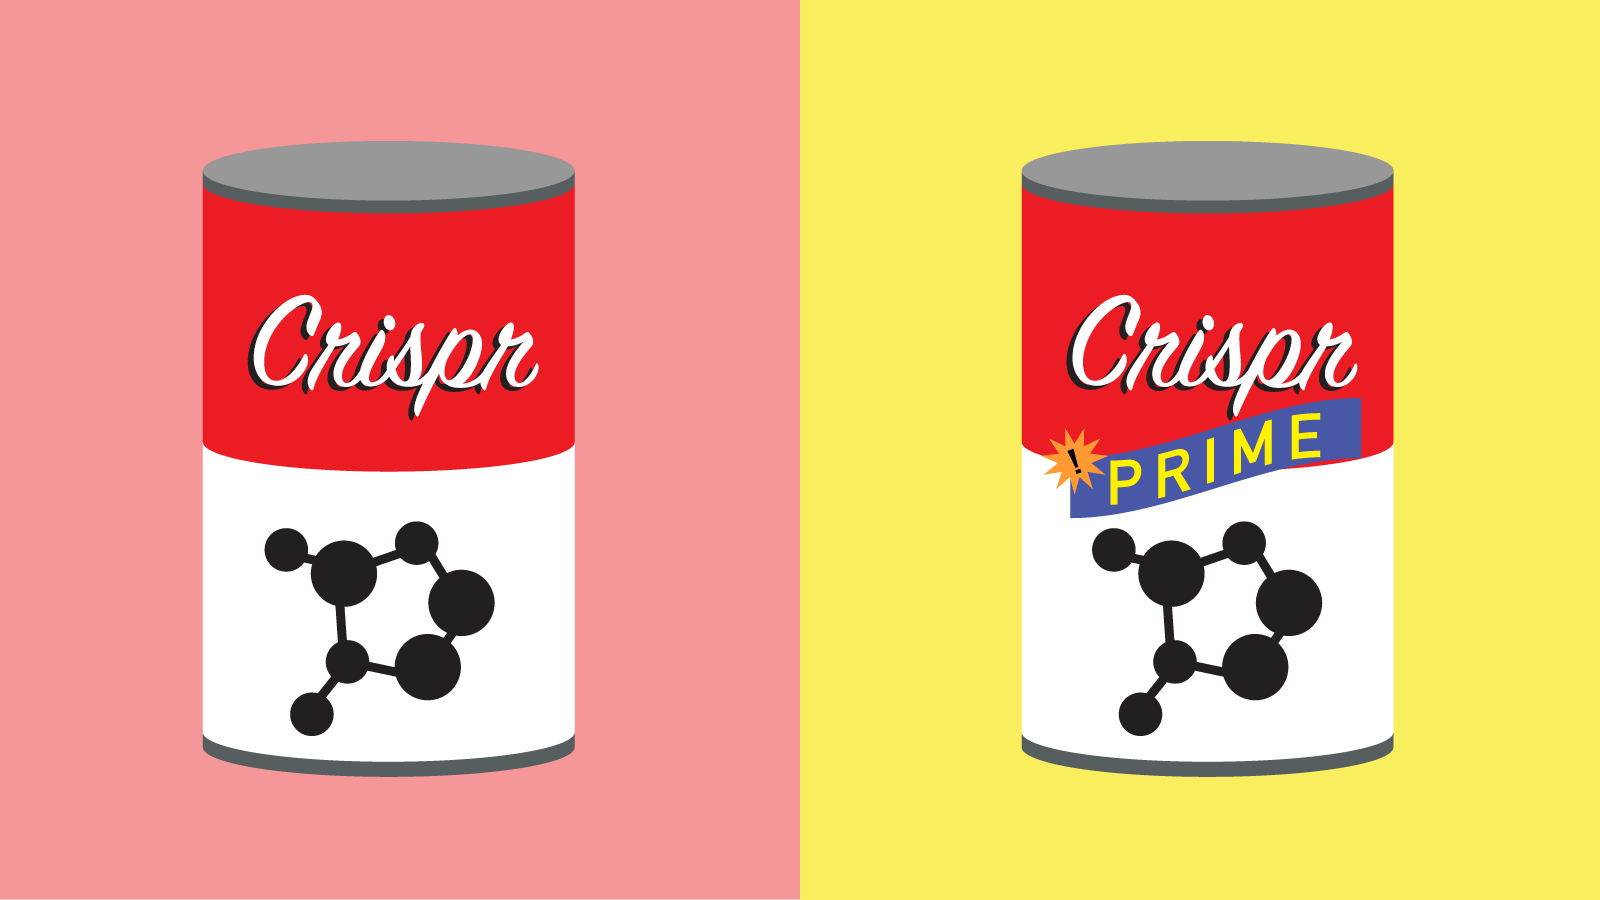 Conceptual illustration of two cans, one regular Crispr, one Prime